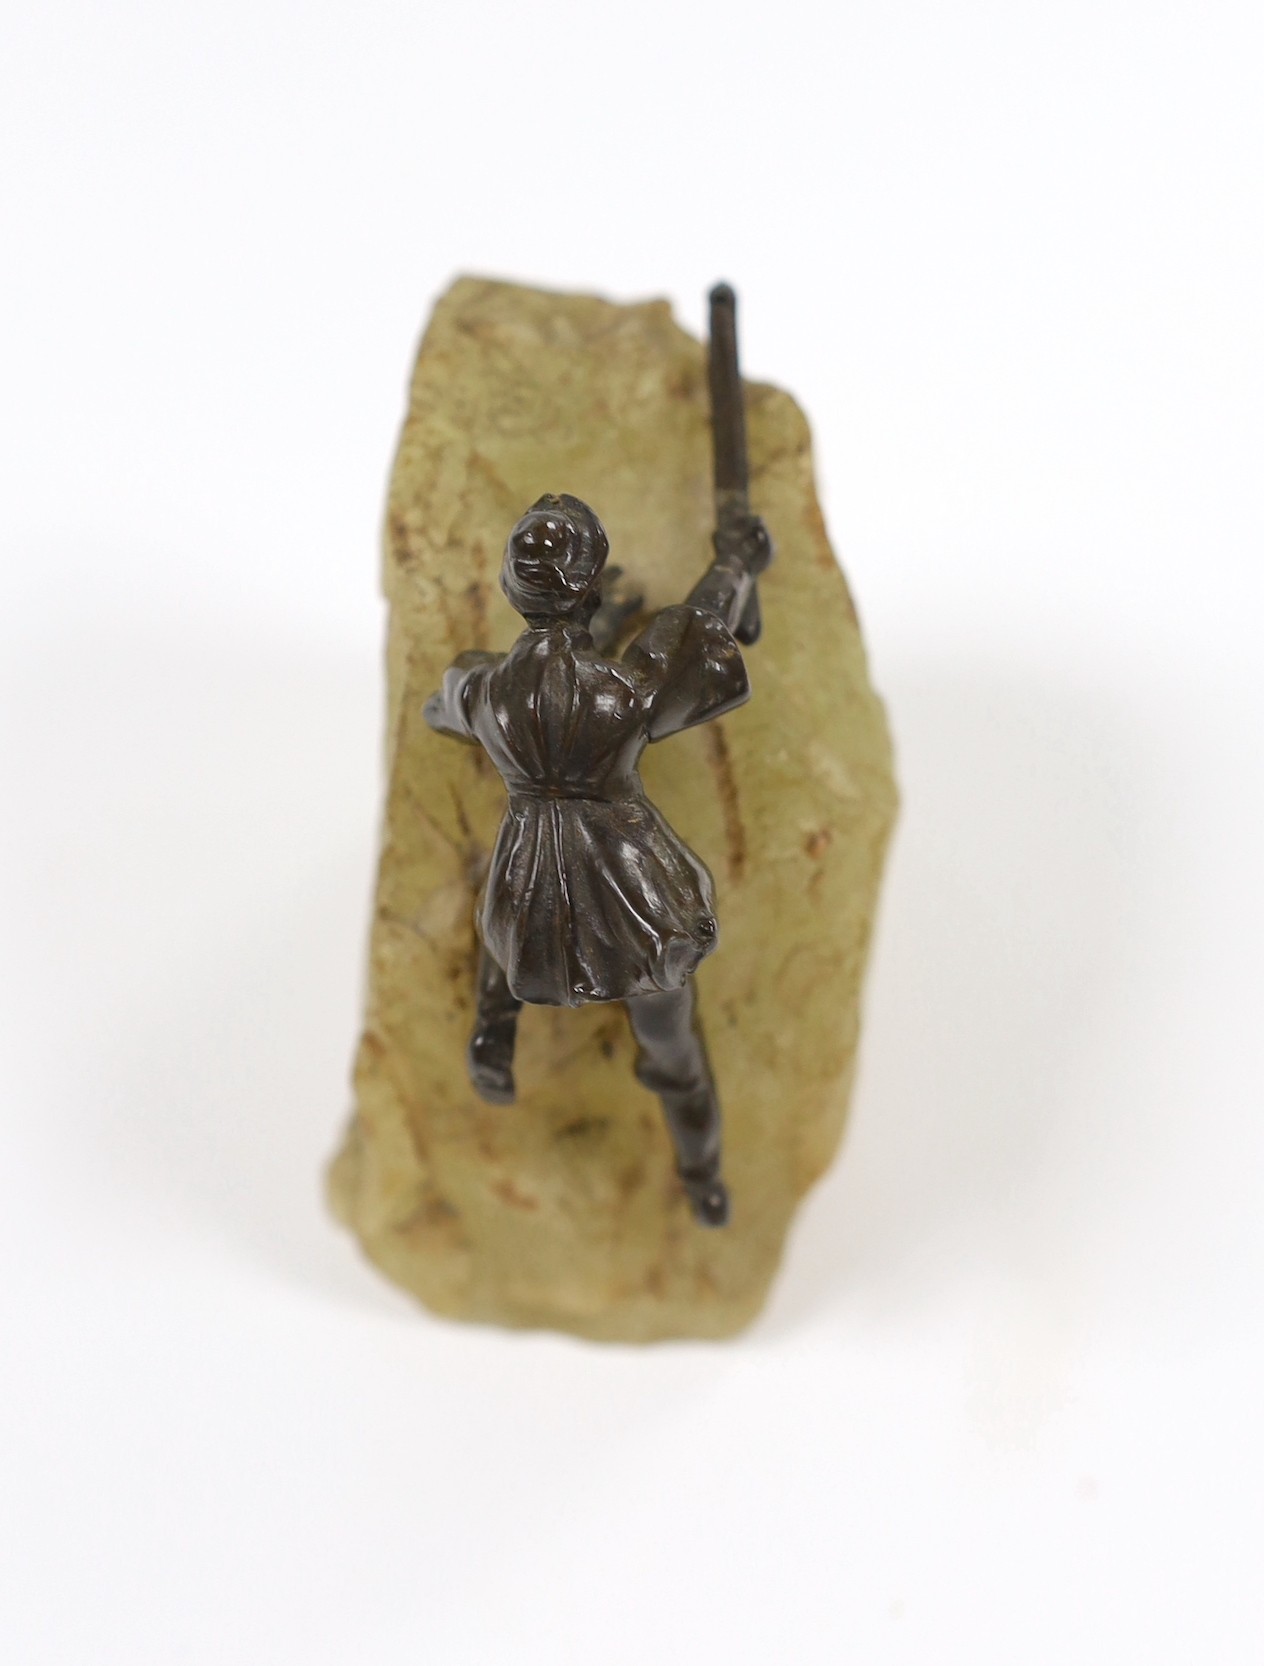 A small 20th century bronze of a climber on onyx, 8cm